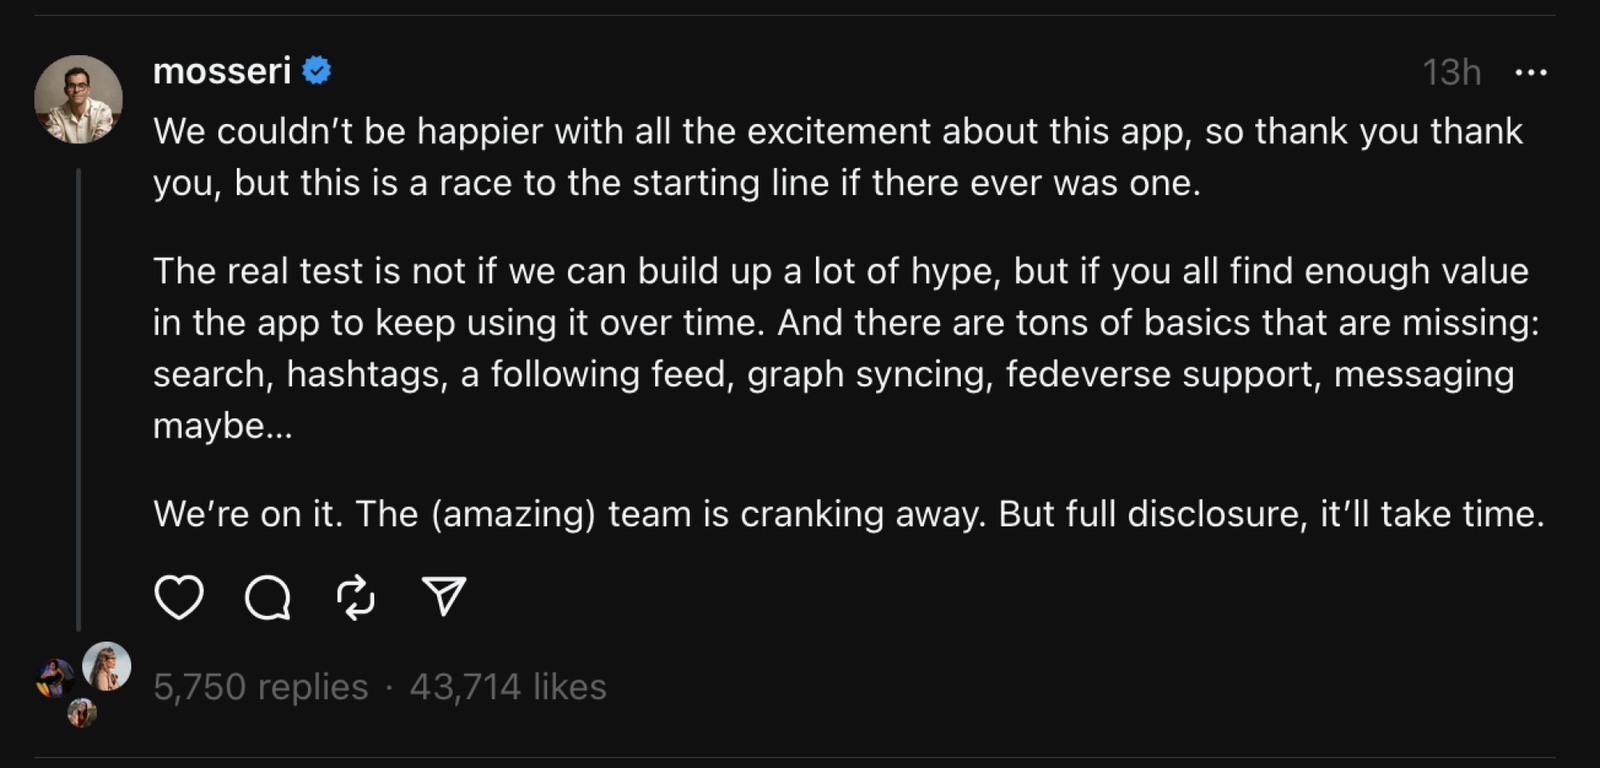 A screenshot of a Threads post by Head of Instagram Adam Mosseri: "We couldn’t be happier with all the excitement about this app, so thank you thank you, but this is a race to the starting line if there ever was one. The real test is not if we can build up a lot of hype, but if you all find enough value in the app to keep using it over time. And there are tons of basics that are missing: search, hashtags, a following feed, graph syncing, fedeverse support, messaging maybe…  We’re on it. The (amazing) team is cranking away. But full disclosure, it’ll take time."